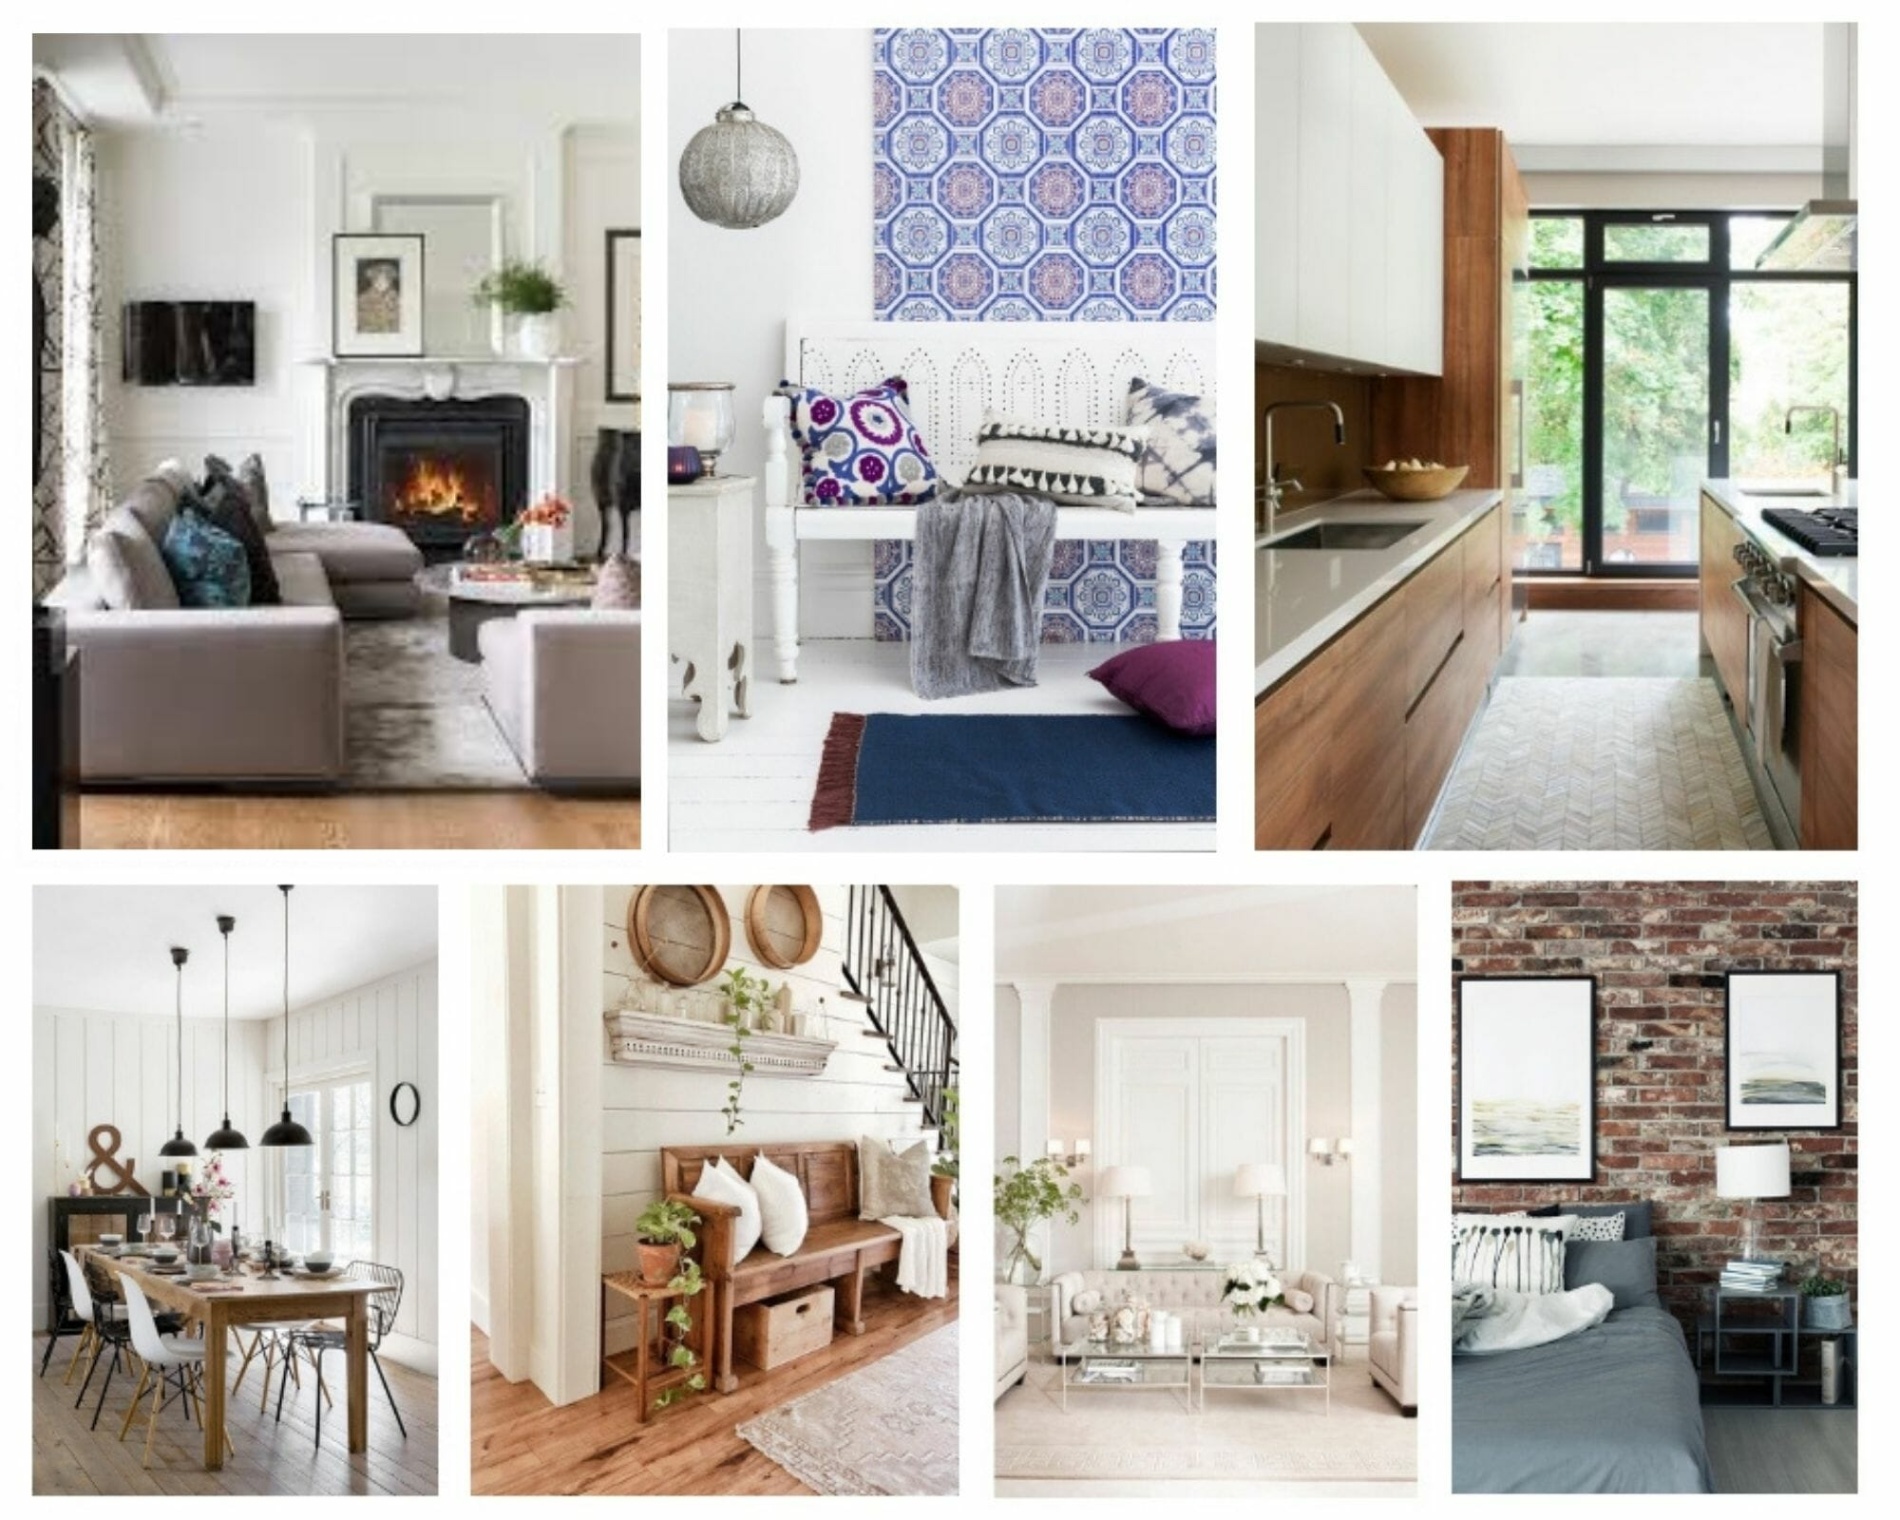 Find Your Interior Design Style: Take This Fun Quiz Now!